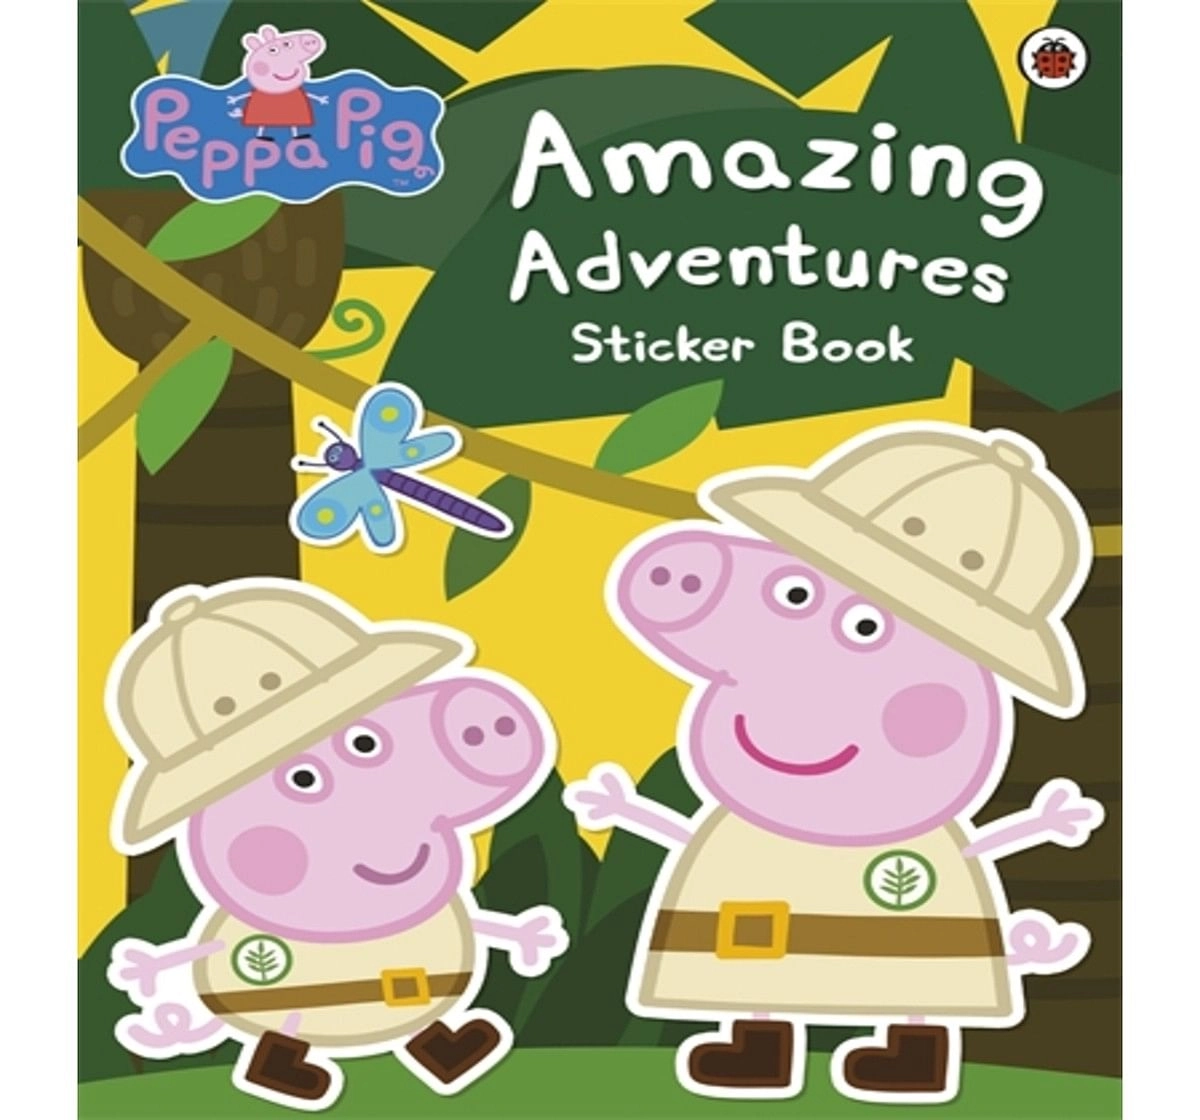 Peppa Pig : Amazing Adventures Sticker B, 24 Pages Book by Ladybird, Paperback